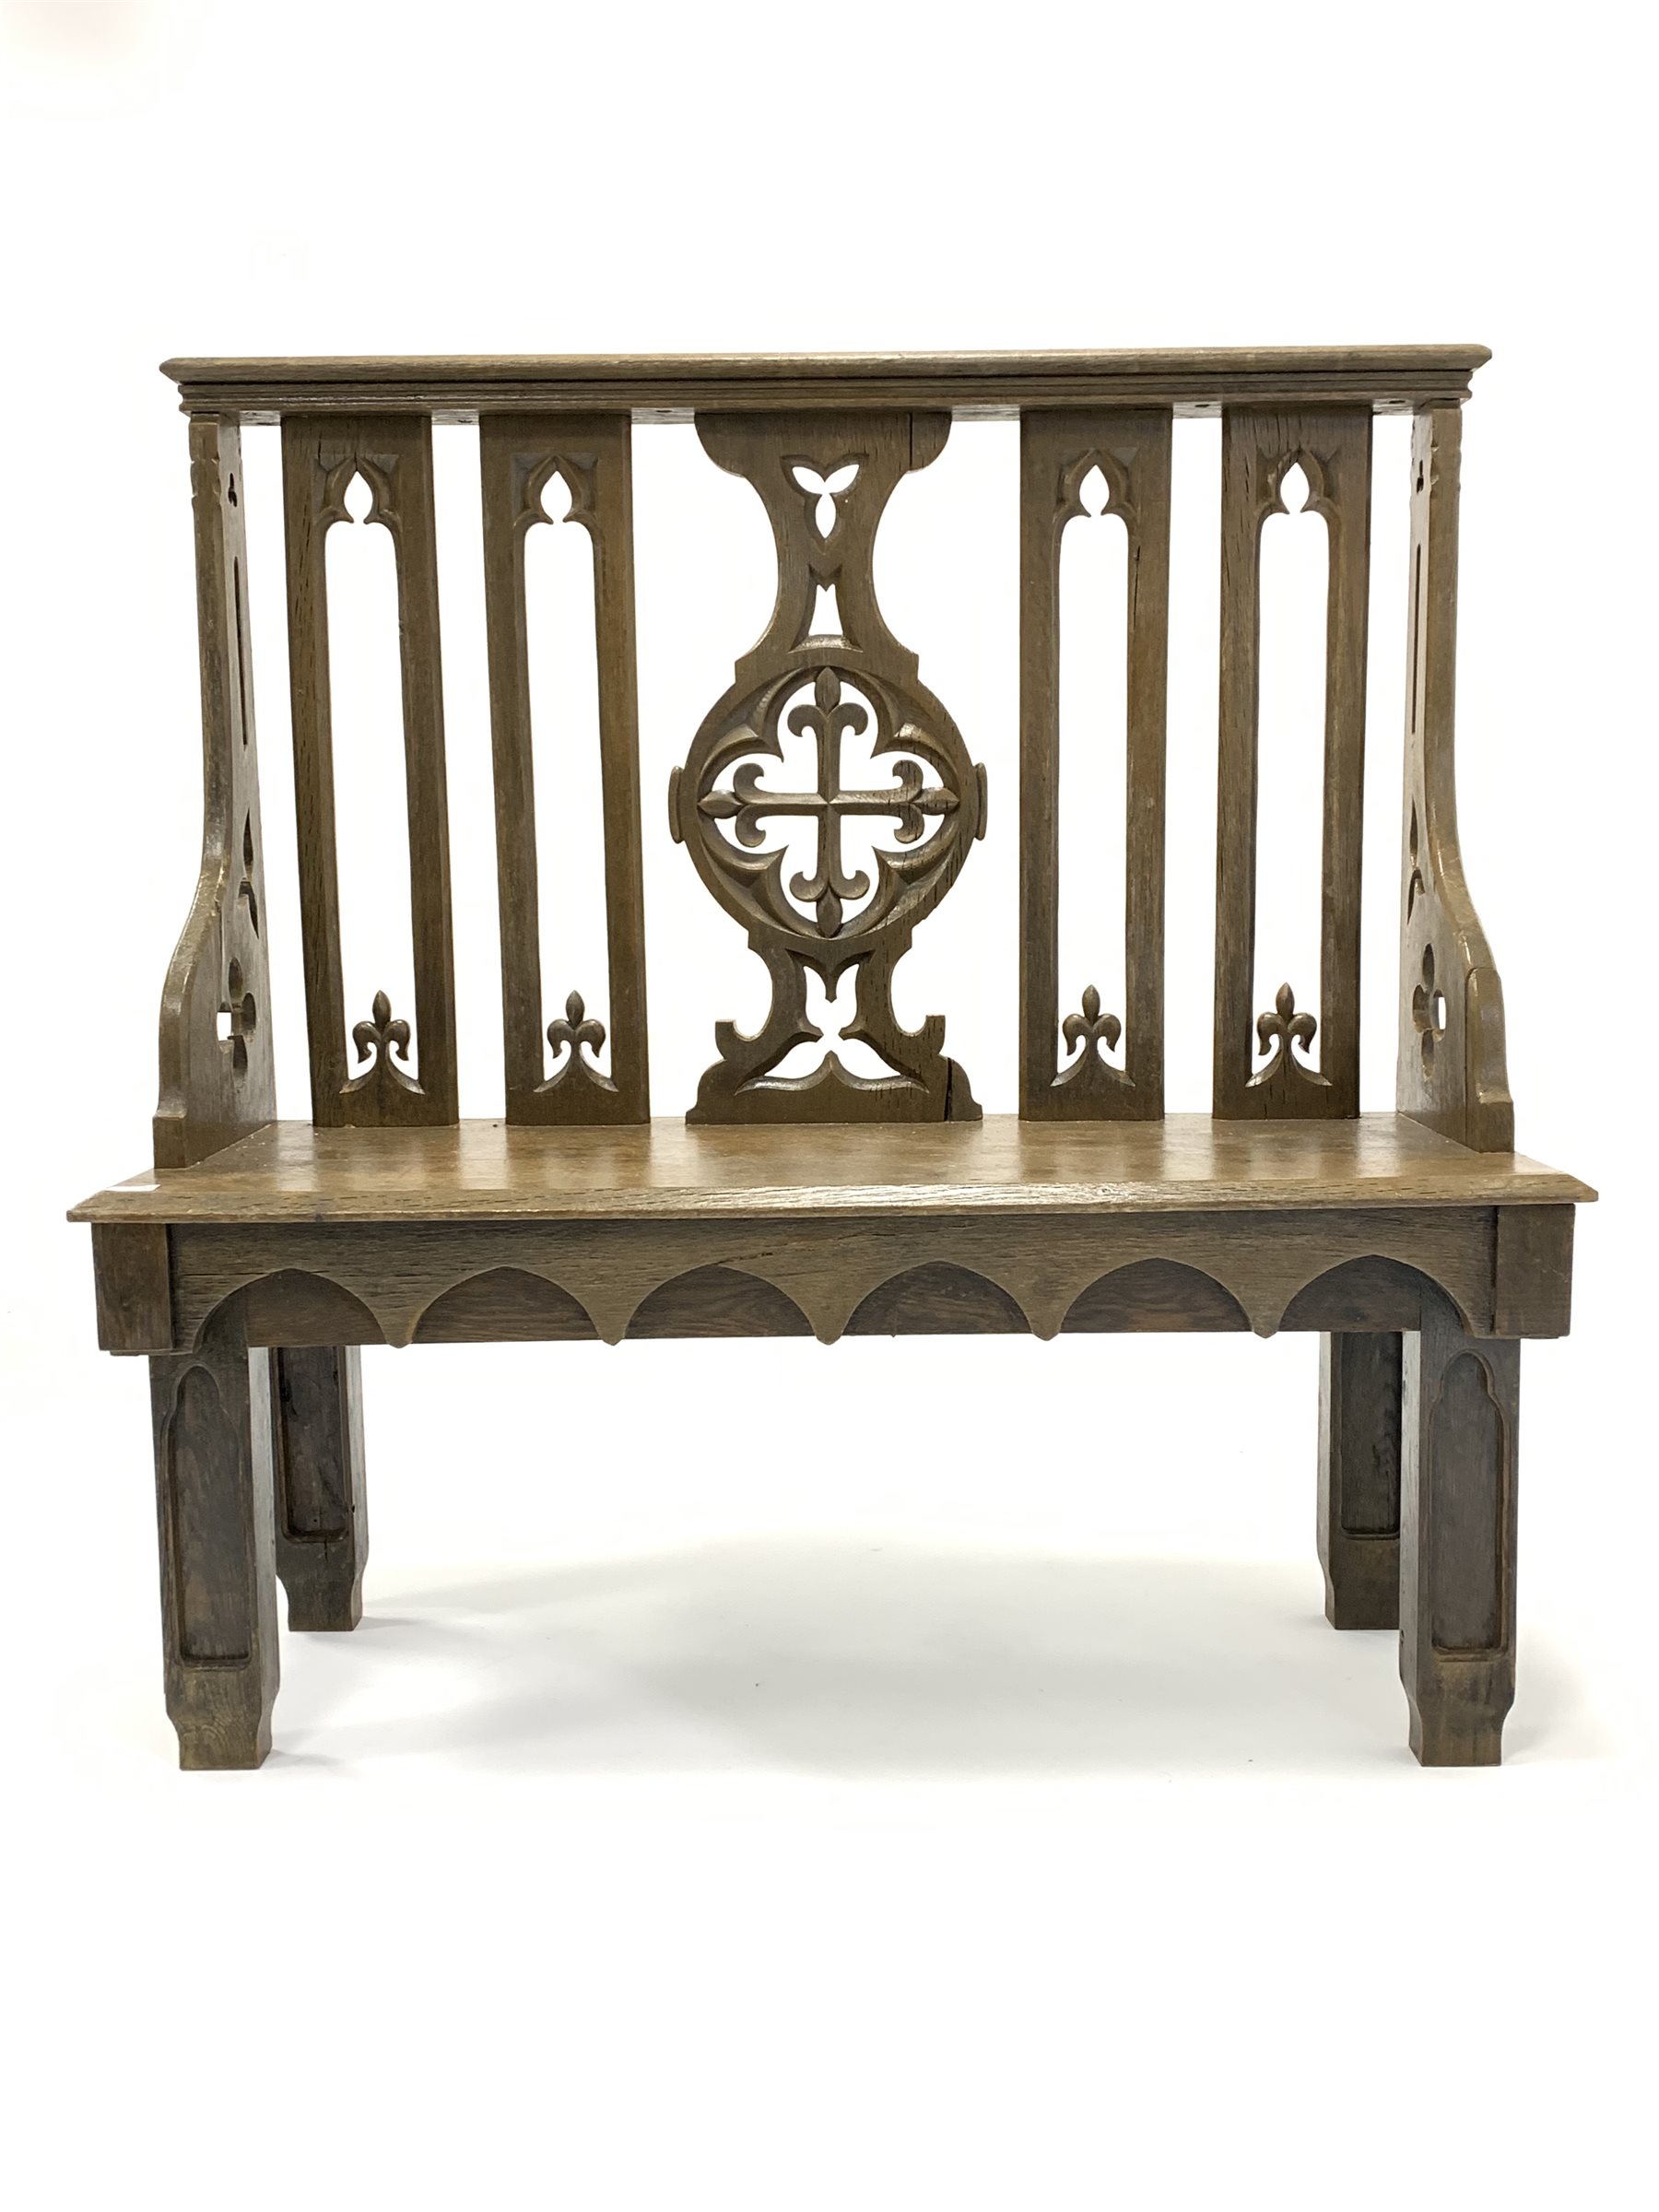 19th century oak hall bench of Gothic design, with arched splats carved with fleur de lis, chamfered - Image 2 of 5